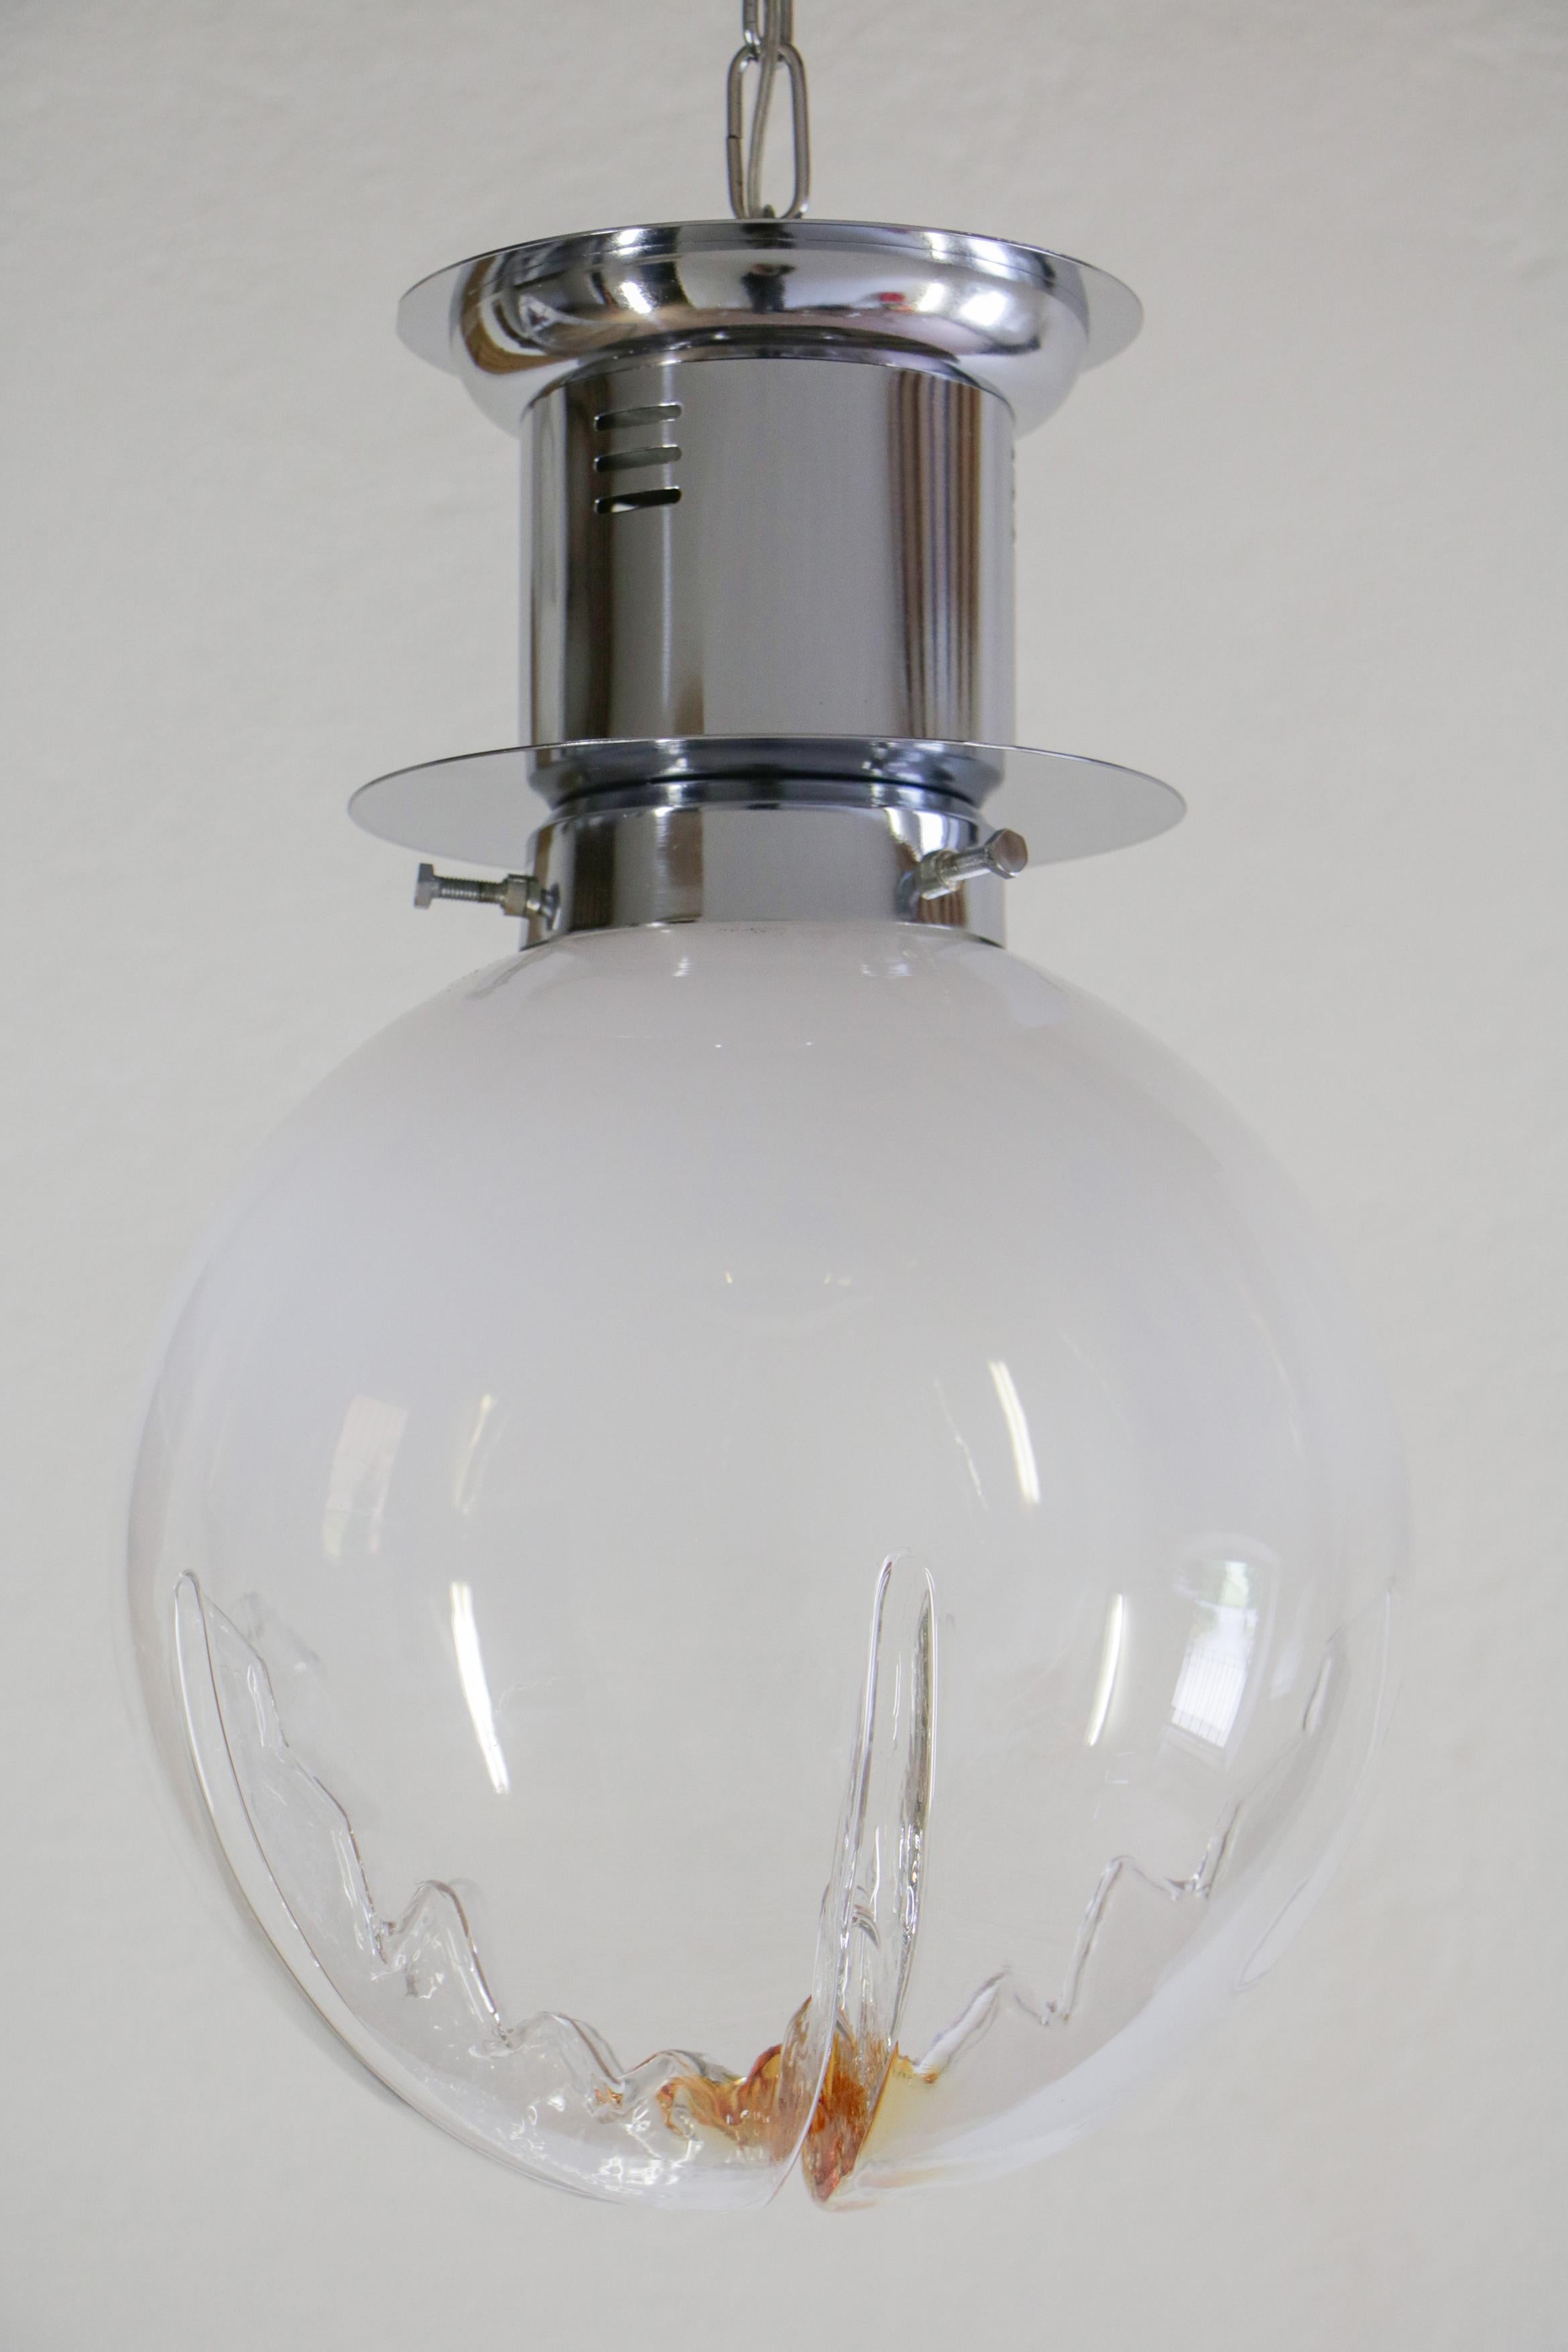 Late 20th Century Italian Space Age Ball Pendant Ceiling Lamp Attributed to Mazzega, 1970s For Sale